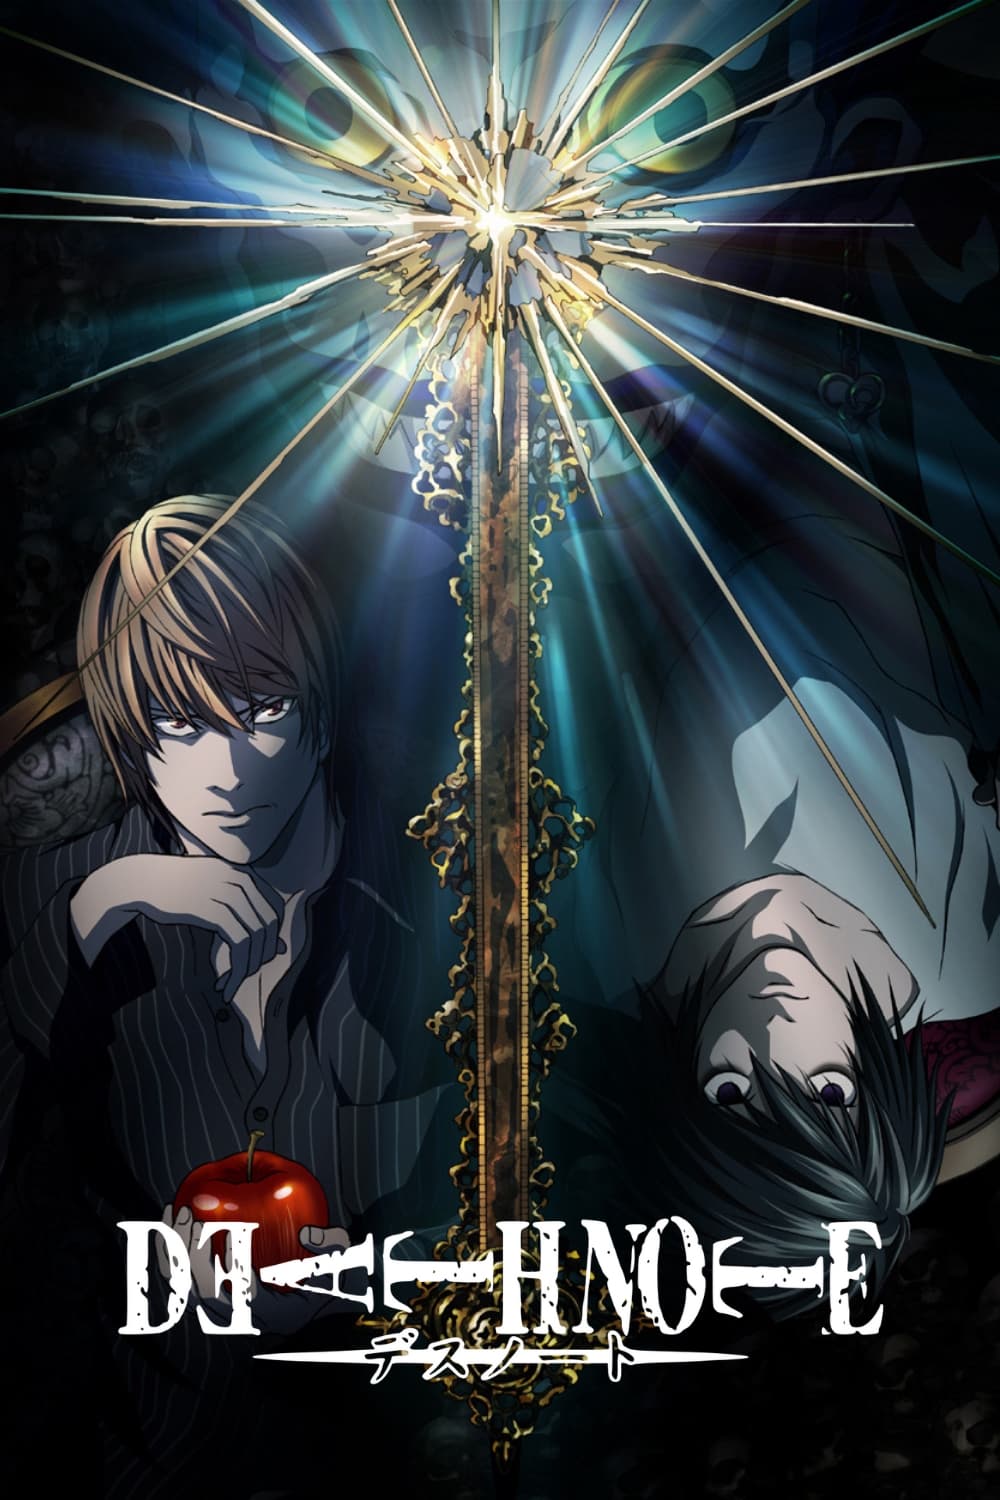 Death note preview